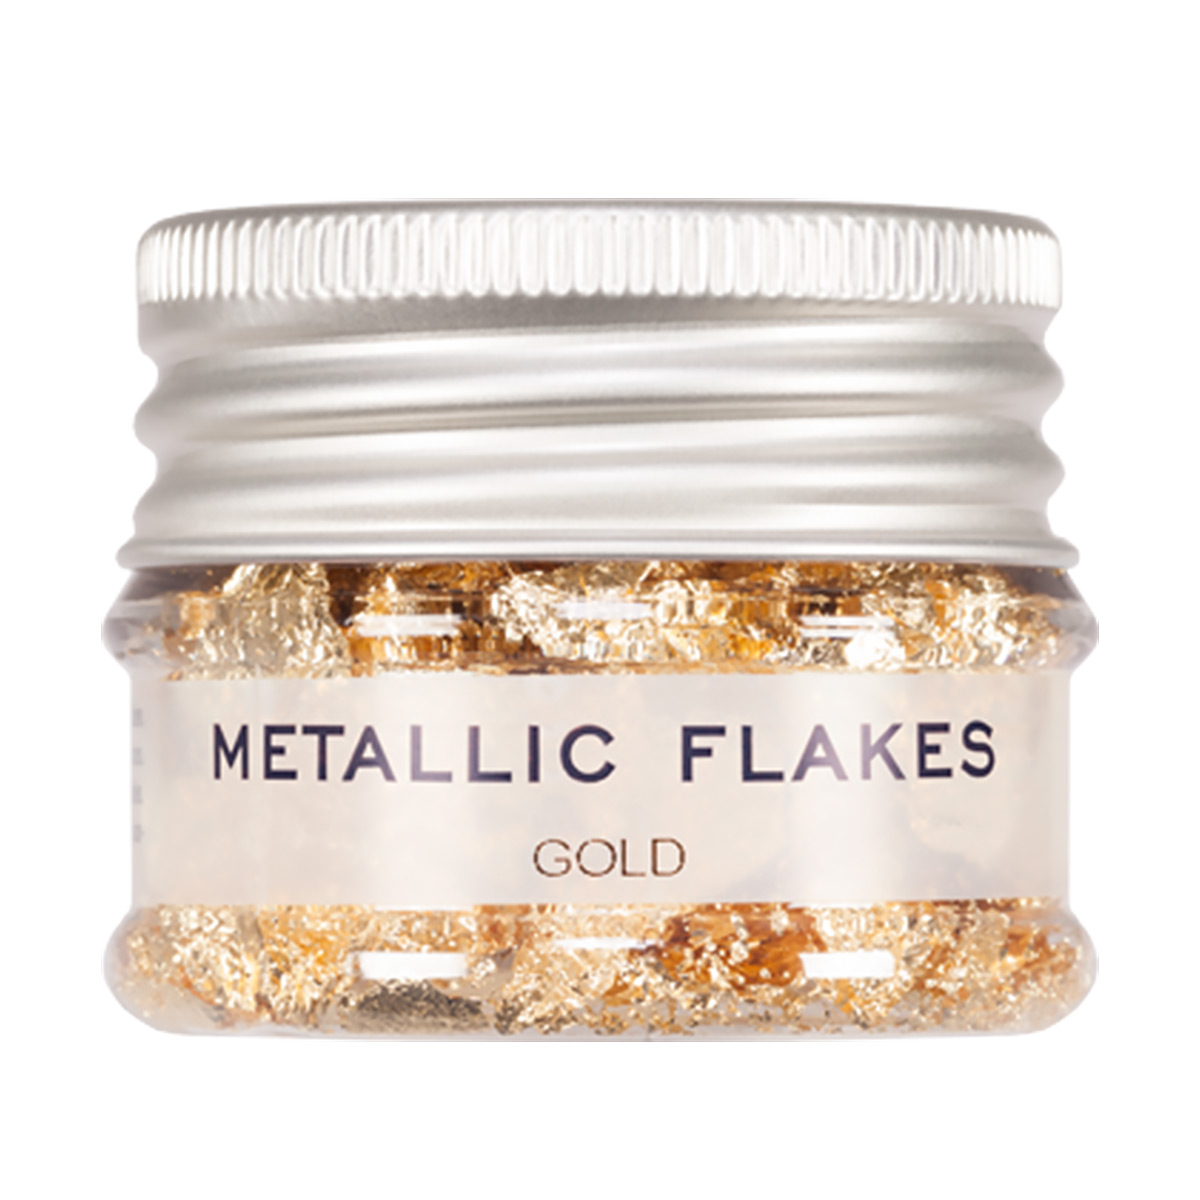 Metall flakes, guld